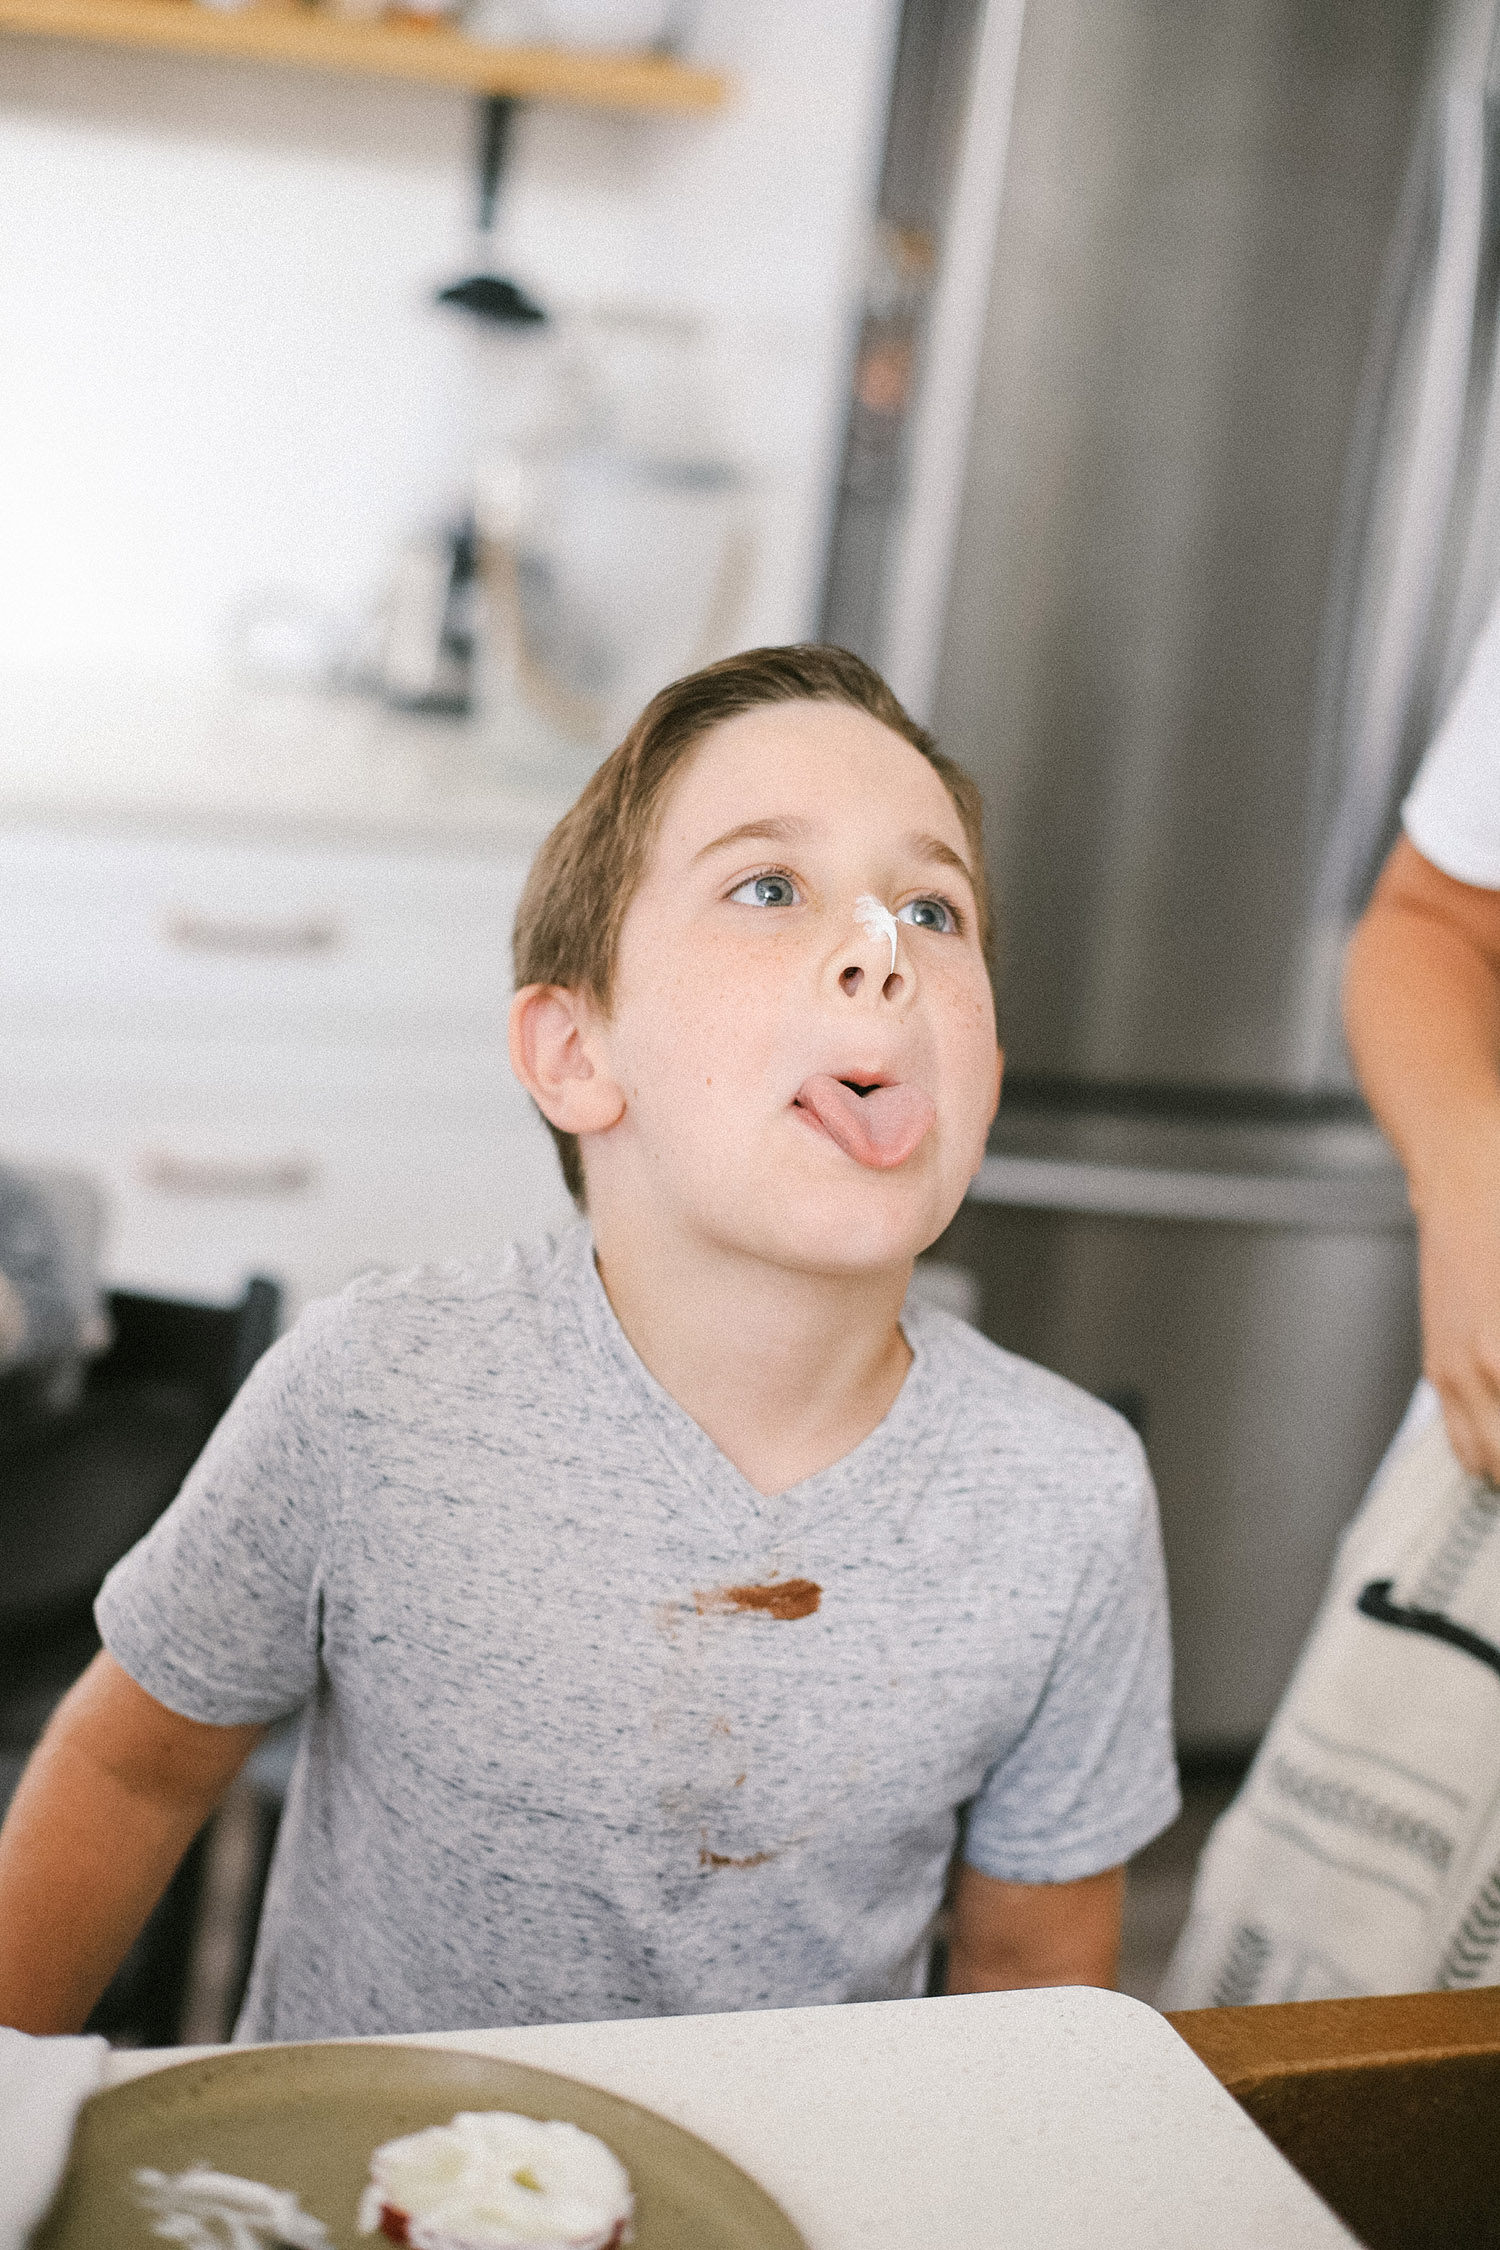 Easy snack ideas for a healthy sweet snacktivity for kids! Apple Donut fun recipe for kids from top Florida blogger Tabitha Blue of Fresh Mommy Blog | Apple Donuts by popular Florida motherhood blog, Fresh Mommy Blog: image of little boy with marshmallow fluff on his nose.  